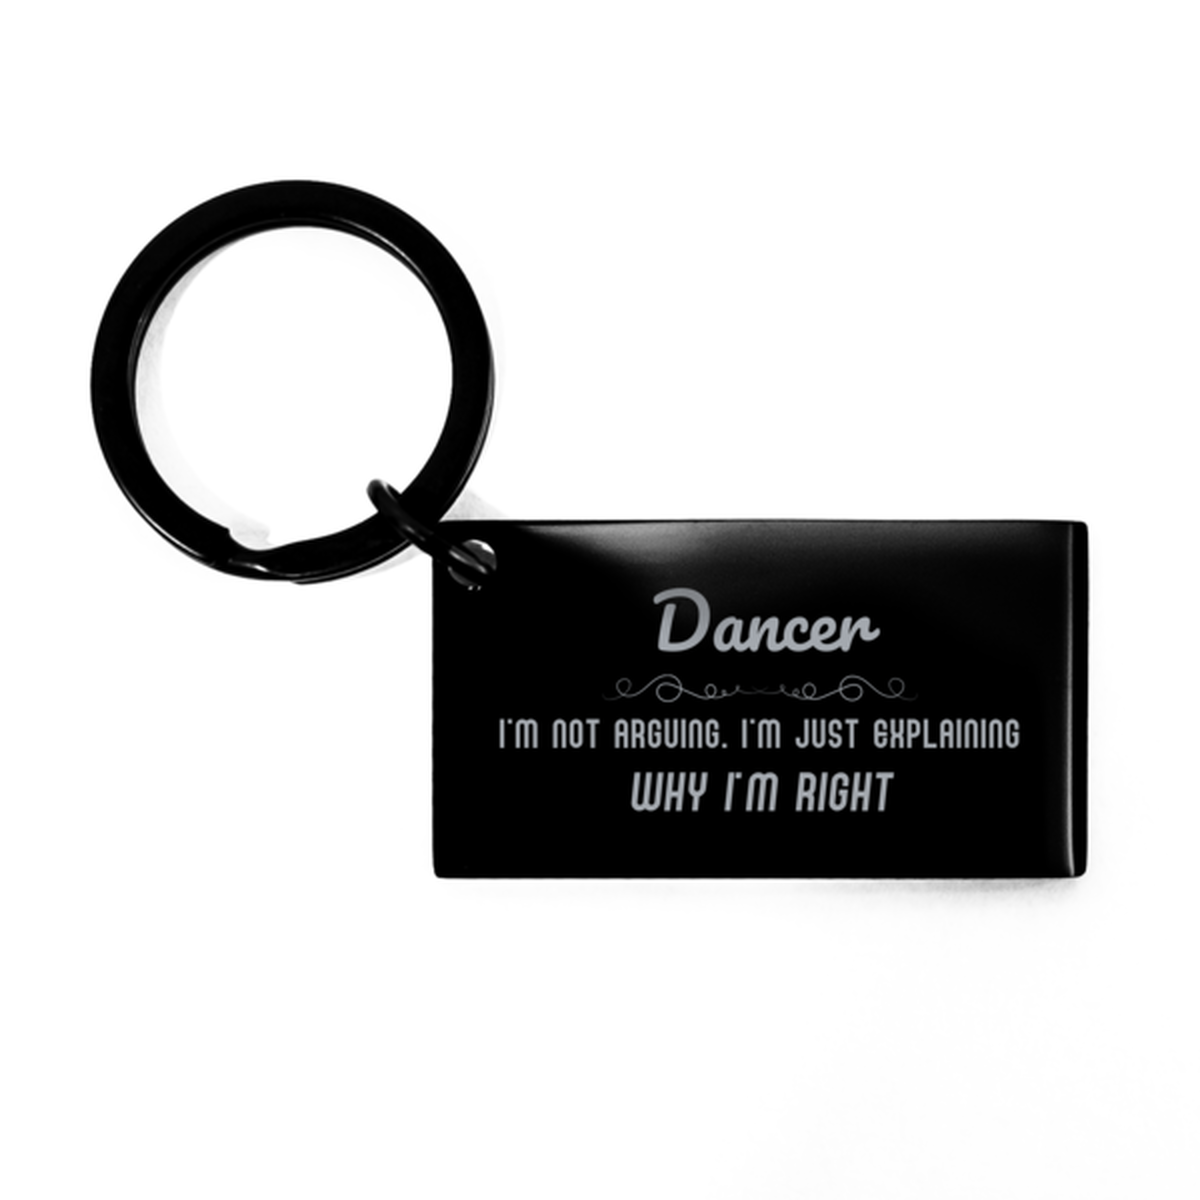 Dancer I'm not Arguing. I'm Just Explaining Why I'm RIGHT Keychain, Funny Saying Quote Dancer Gifts For Dancer Graduation Birthday Christmas Gifts for Men Women Coworker